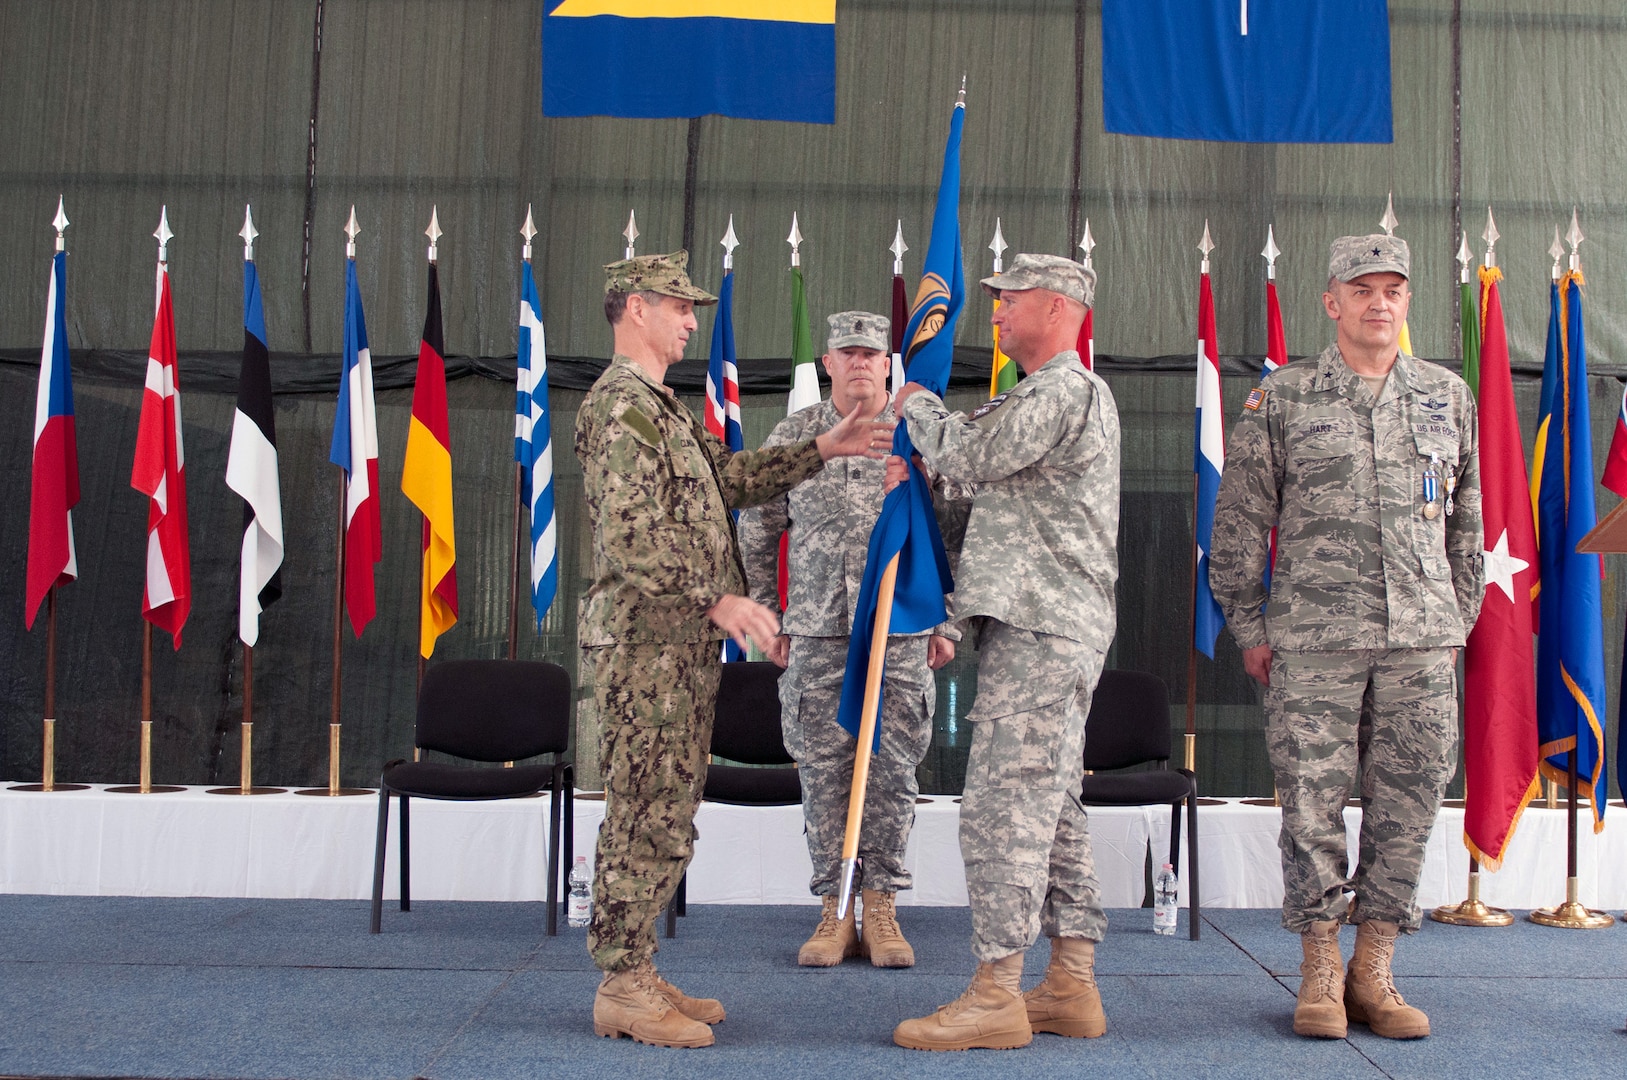 Navy Adm. Bruce W. Clingan, commander Allied Joint Force Command Naples, commander U.S. Naval Forces Europe, commander U.S. Naval Forces Africa, passes the North Atlantic Treaty Organization colors to Army Brig. Gen. Christopher J. Petty, a Colorado National Guard member, during a transfer of authority ceremony at Camp Butmir, Bosnia, June 25, 2014. Petty took over command from Air Force Brig. Gen. Merle D. Hart, an Air Force Reservist and outgoing commander of NATO Headquarters Sarajevo.